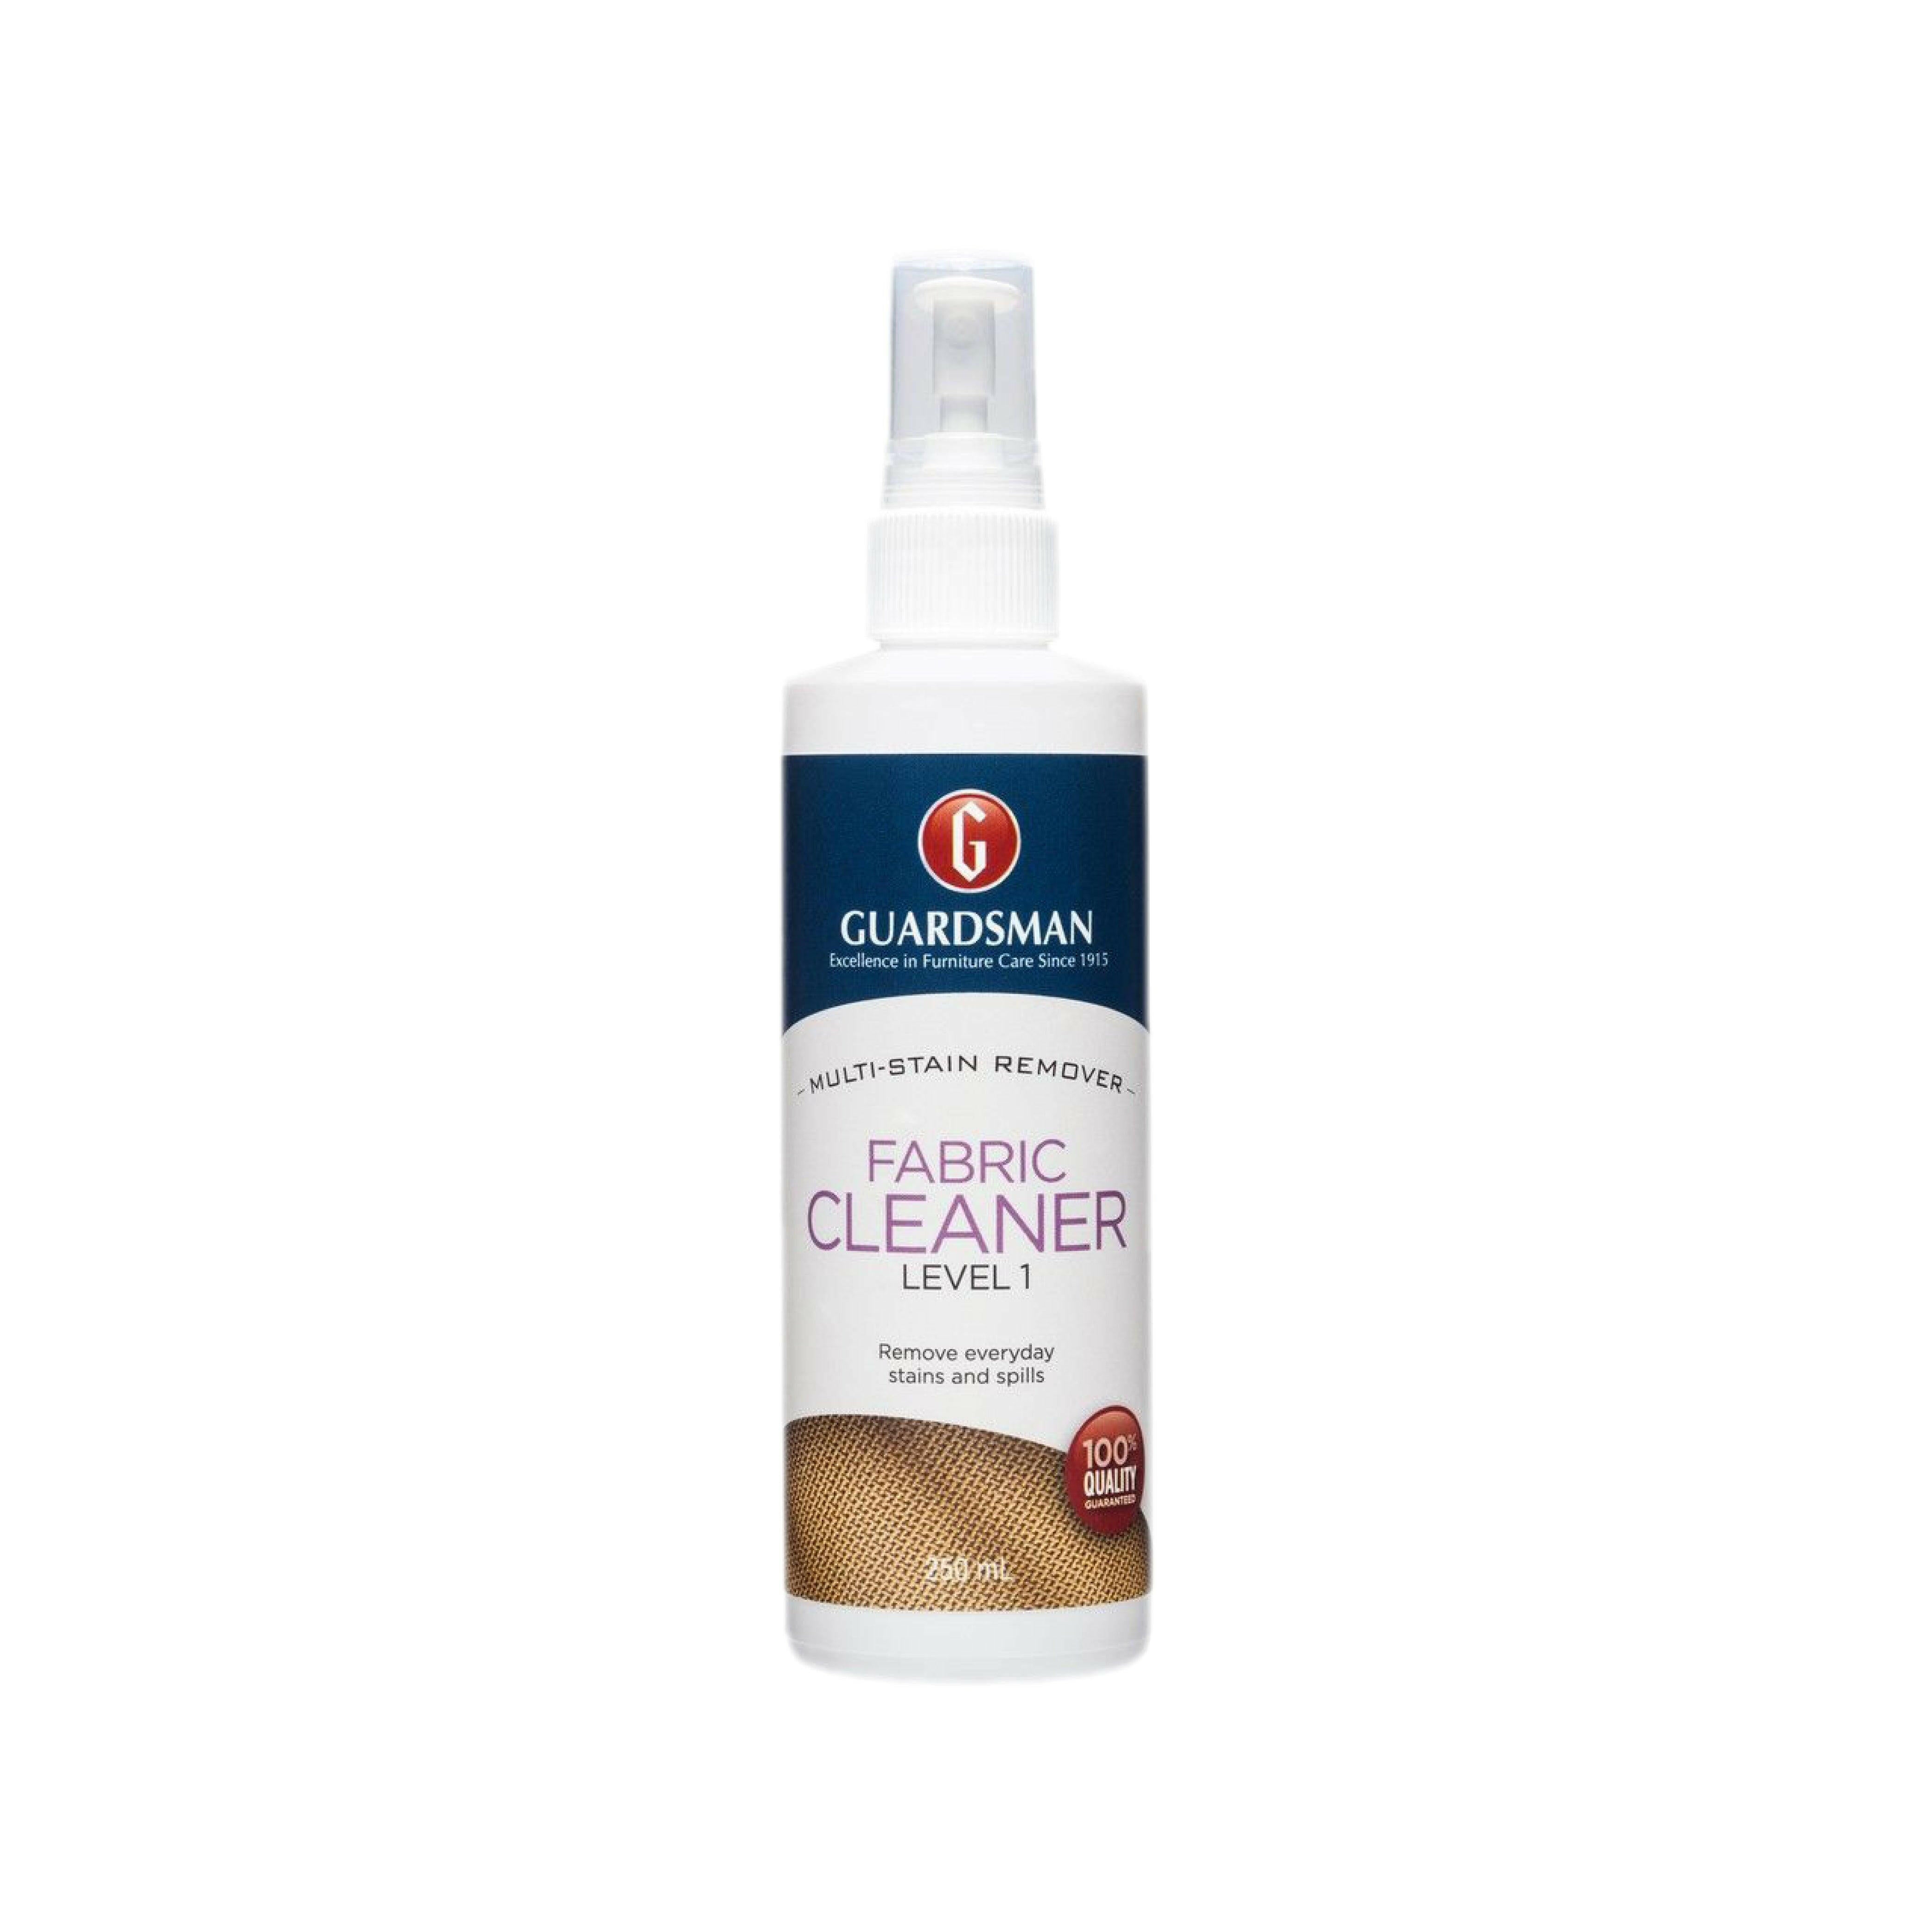 Guardsman Fabric Cleaner Level 1 Multi-Stain Remover | Fabric Care & Clean | Brilliant Home Living